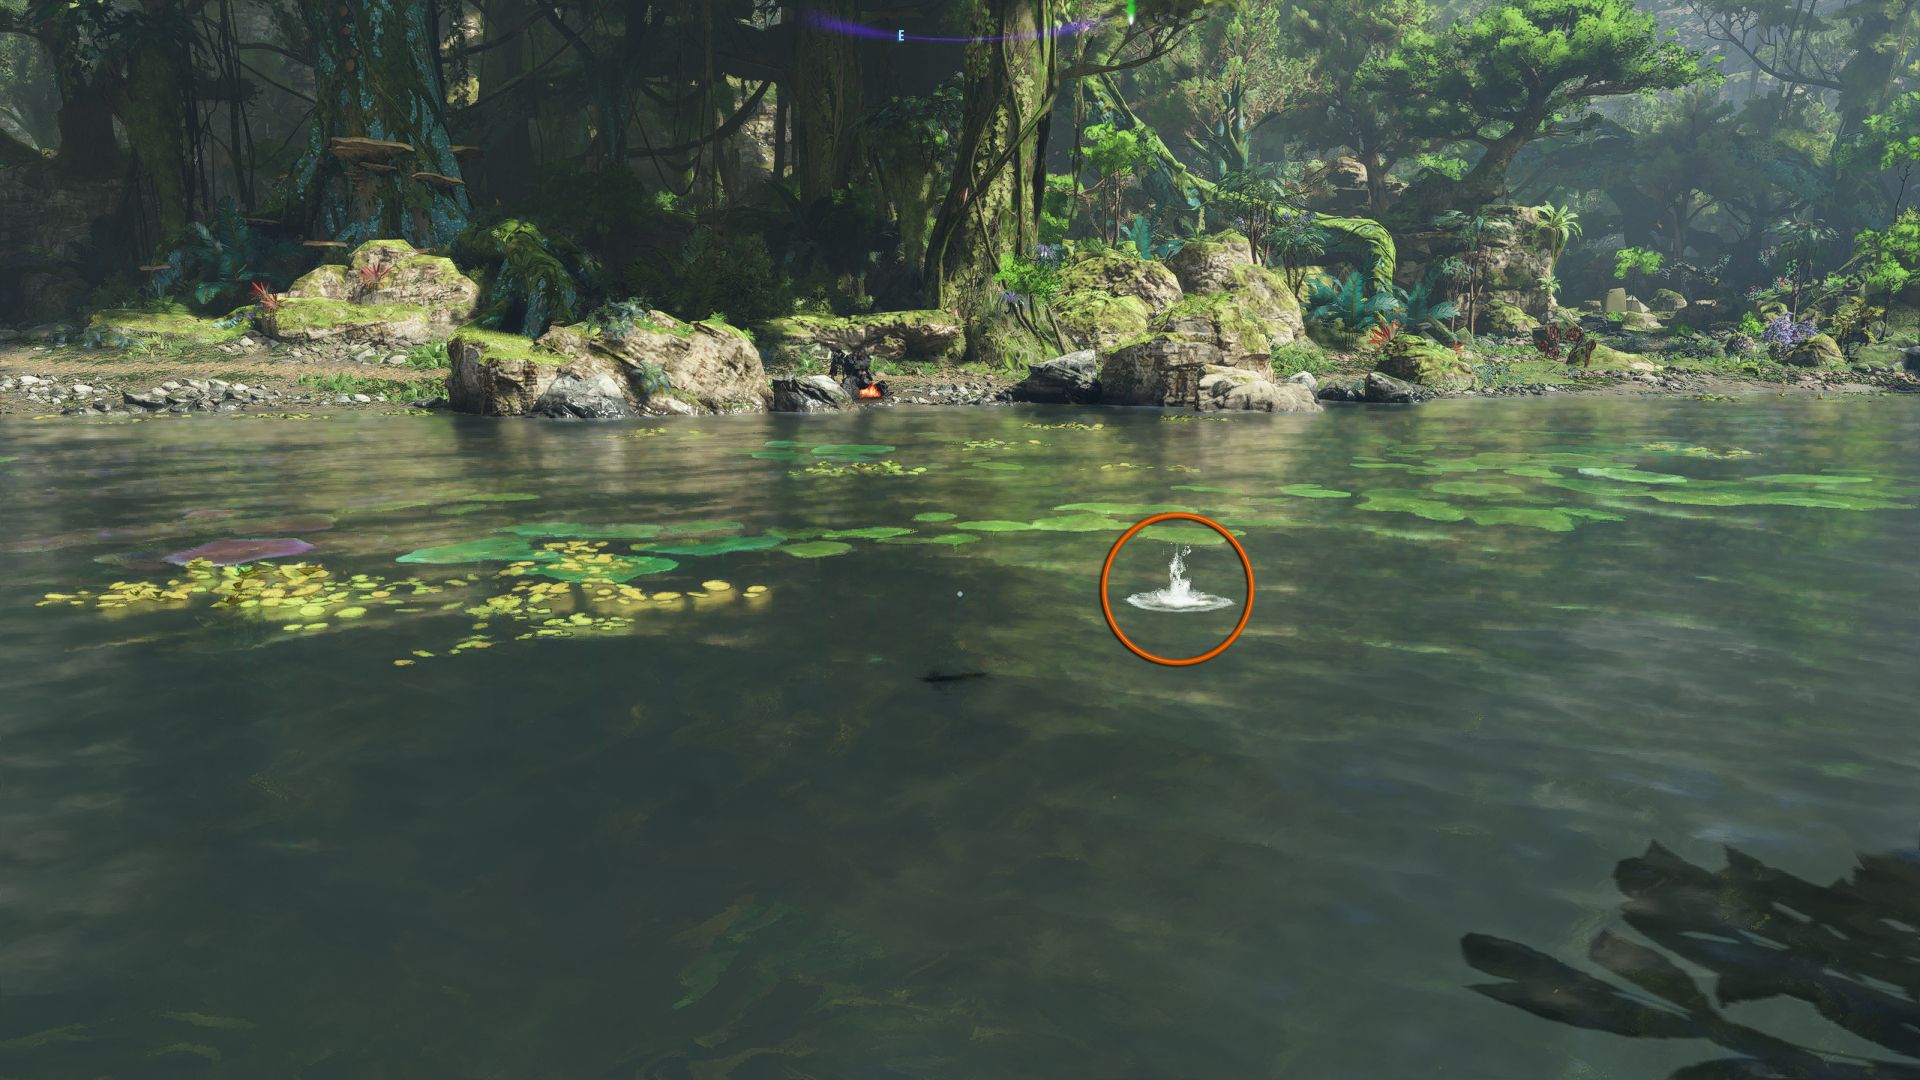 A circle showing the bubbly water area indicating a fish is ready to be fished Avatar Frontiers of Pandora